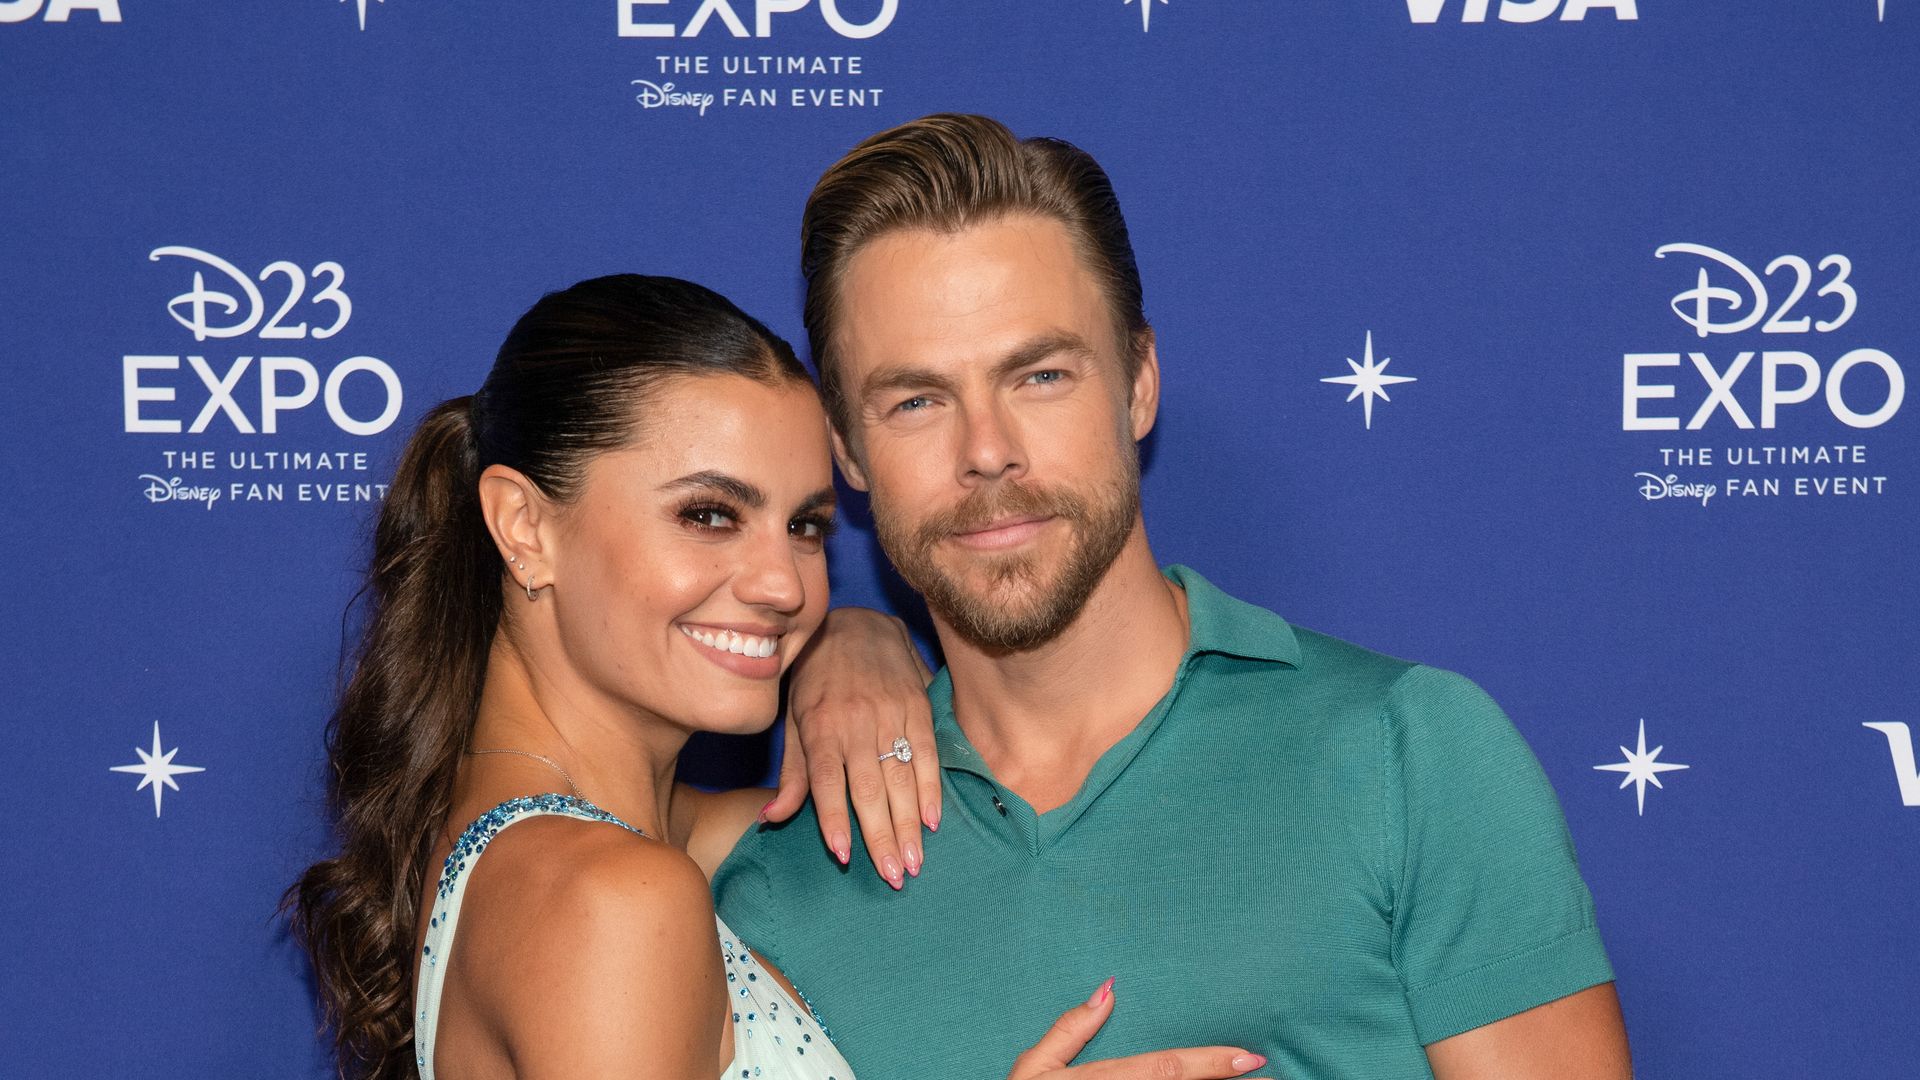 Derek Hough causes confusion as he wishes Happy Mother's Day to wife Hayley Erbert